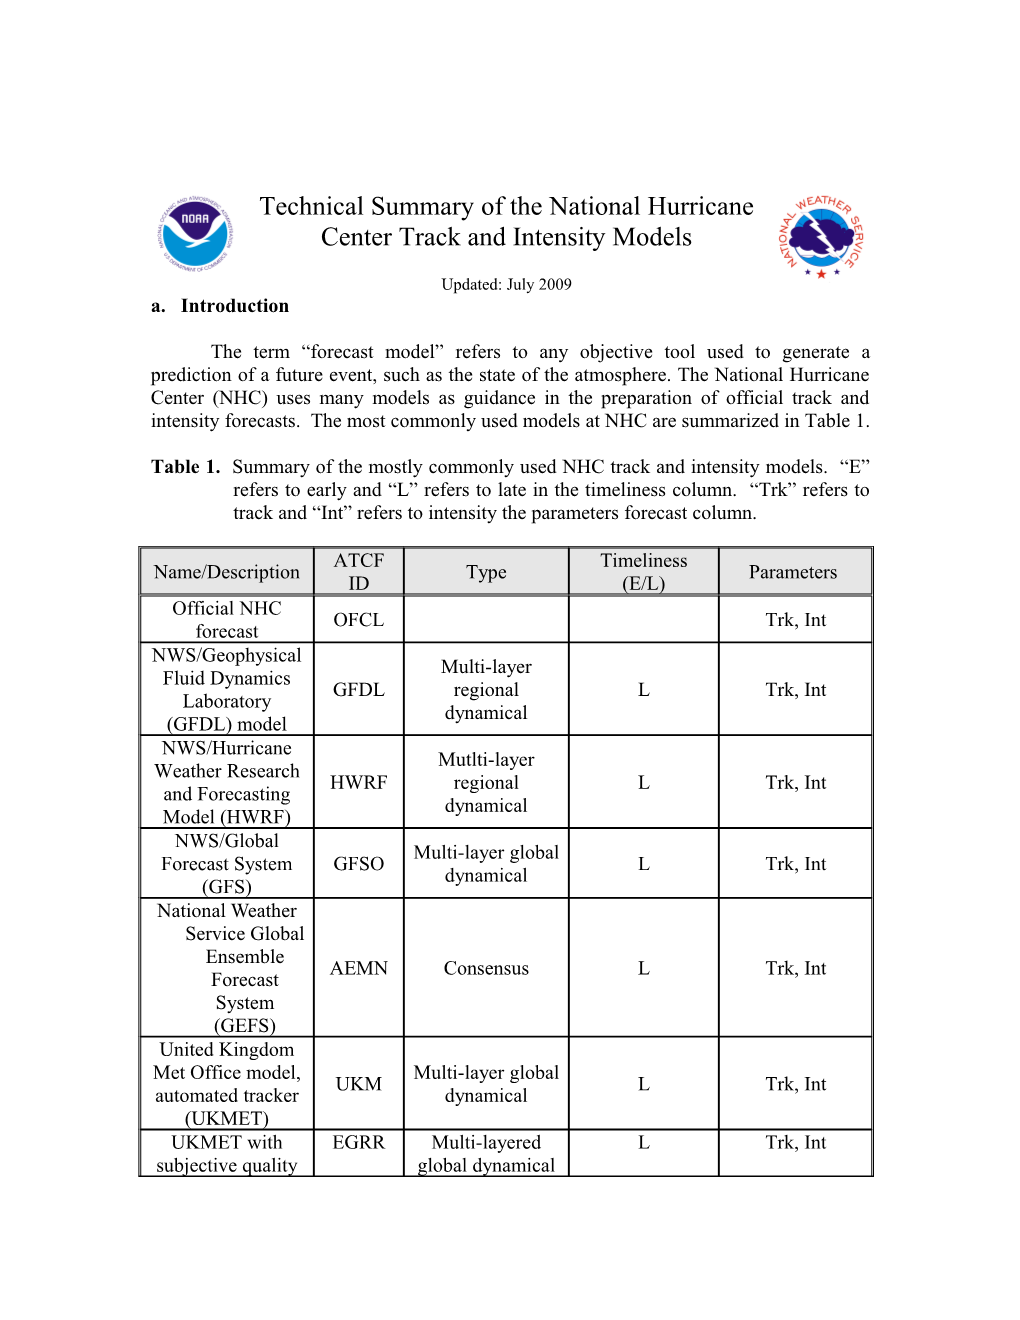 Technical Summary Of The National Hurricane Center Track And Intensity Models